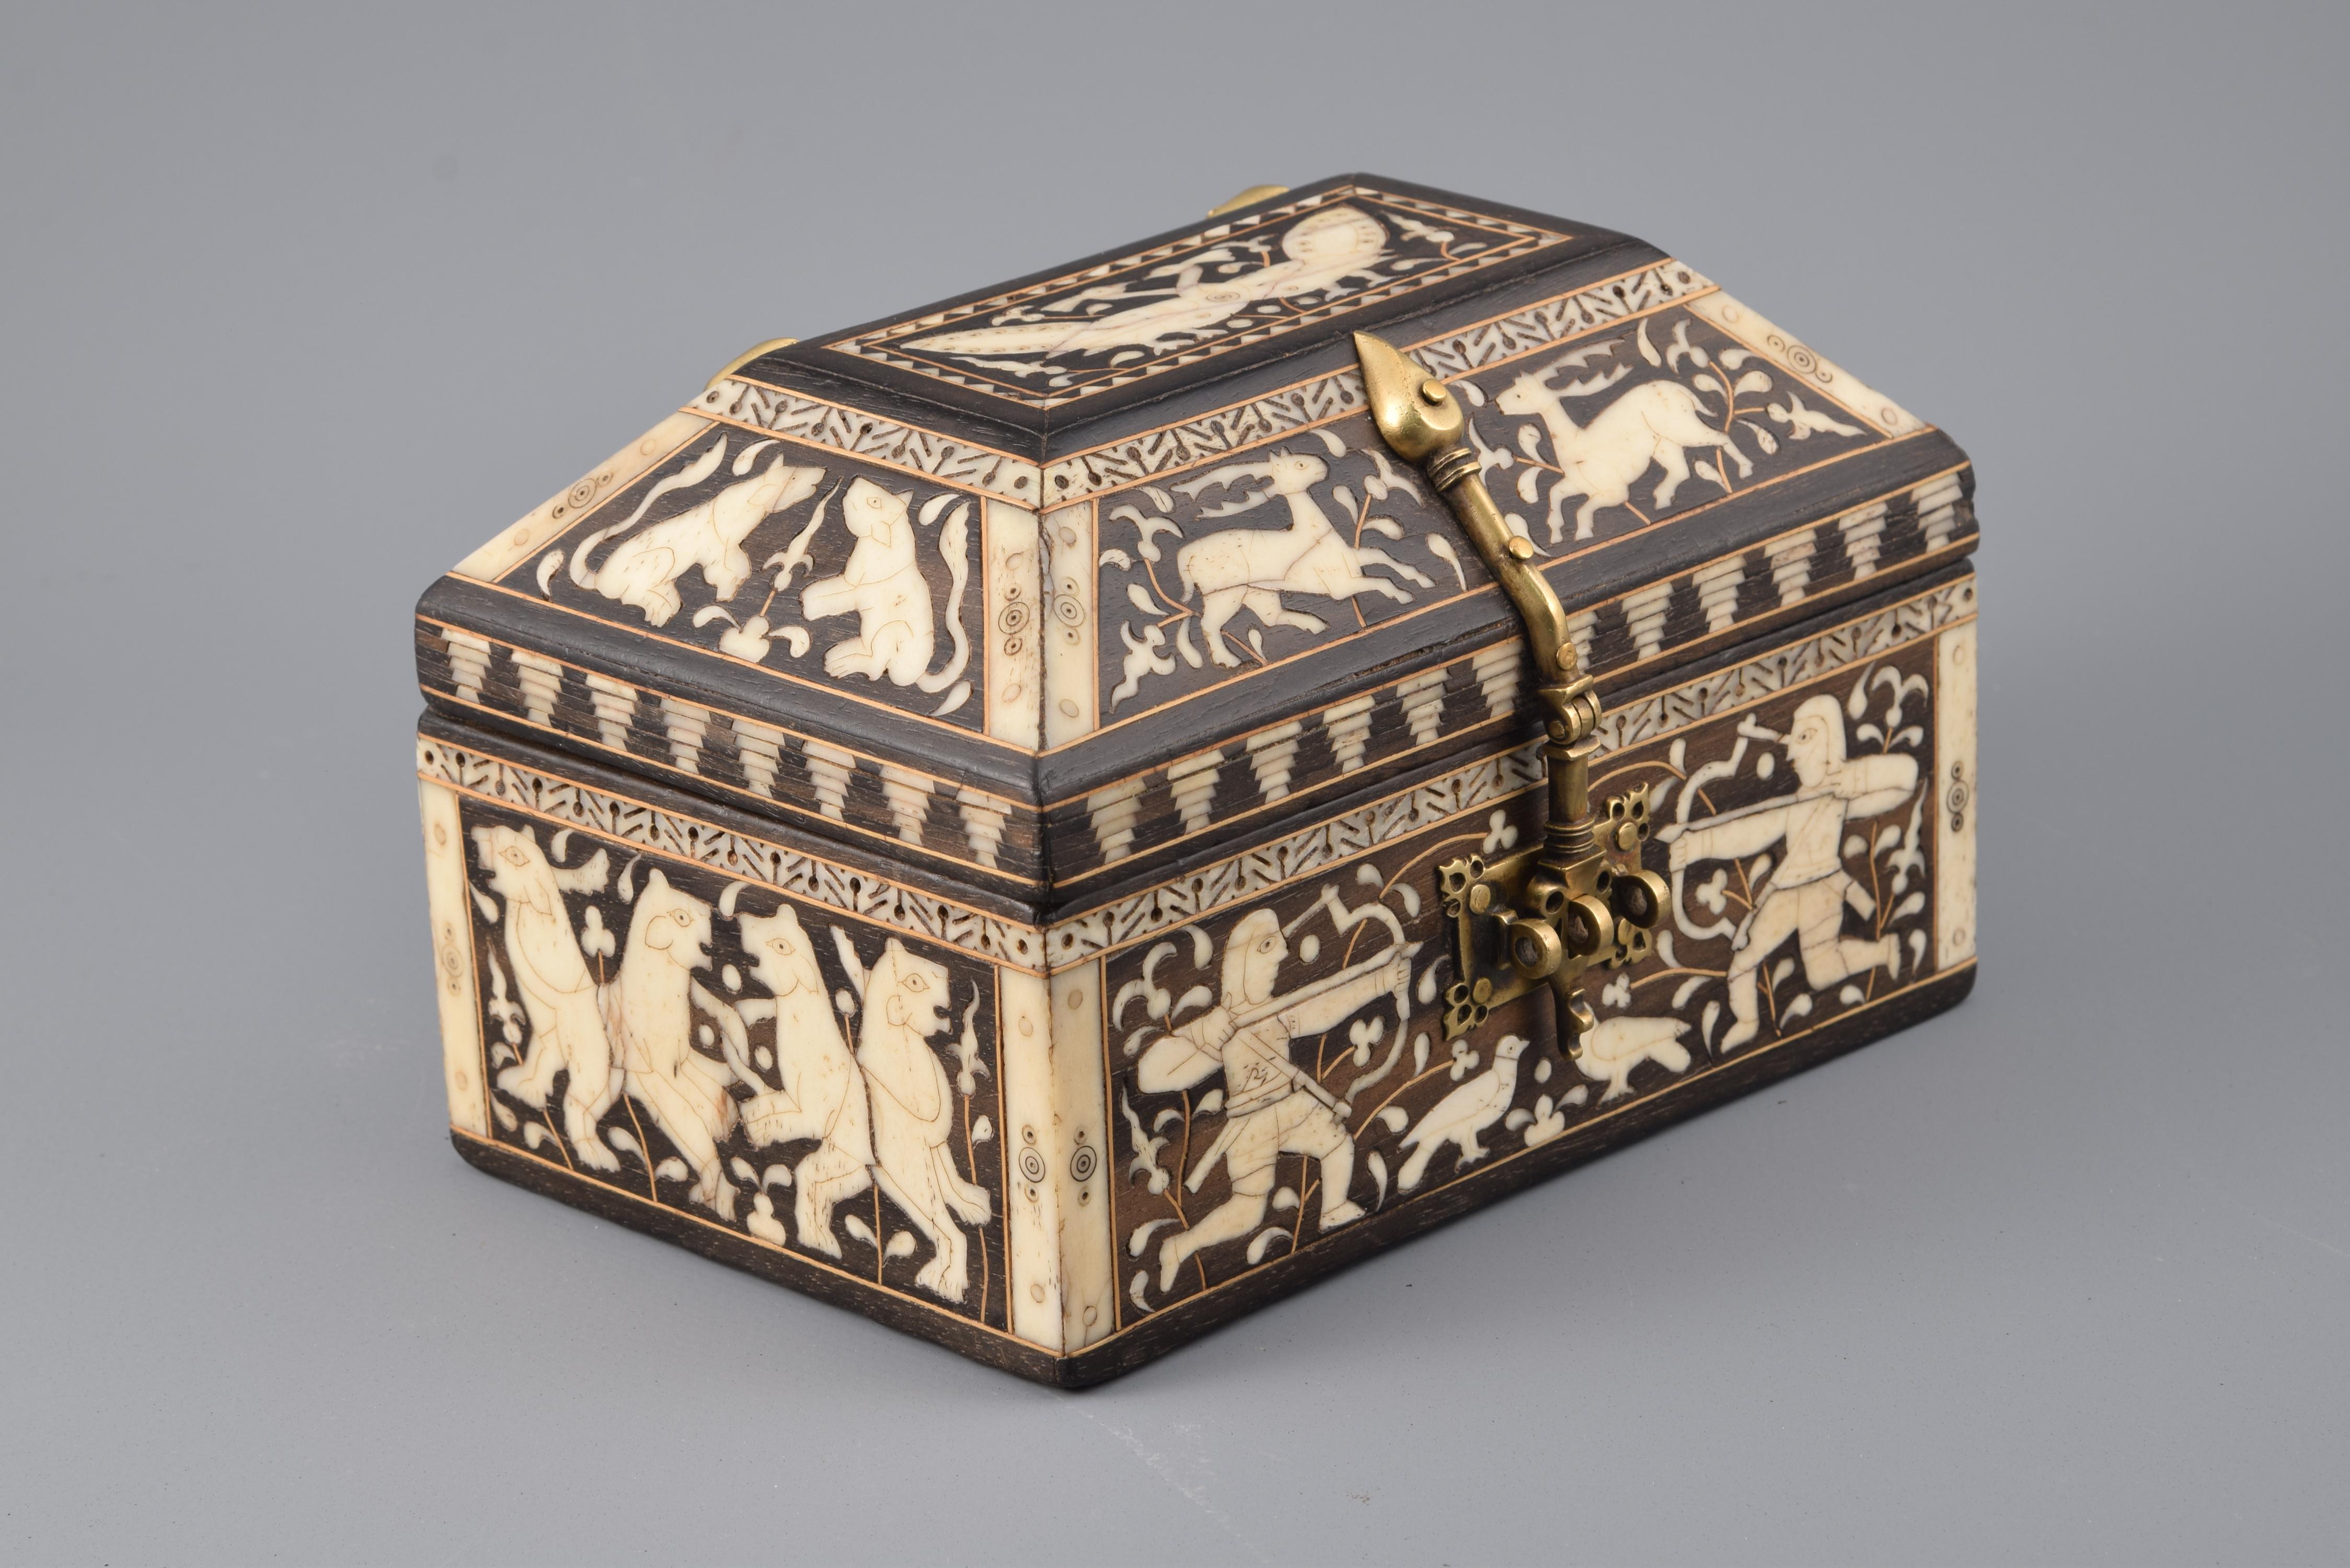 Roof box. Wood, bone, bronze. Following Romanesque models.
Rectangular casket with a canopy-shaped cover, hinges and front closure decorated to the outside with bone marquetry combined with light and dark wood; the interior is finished in dark